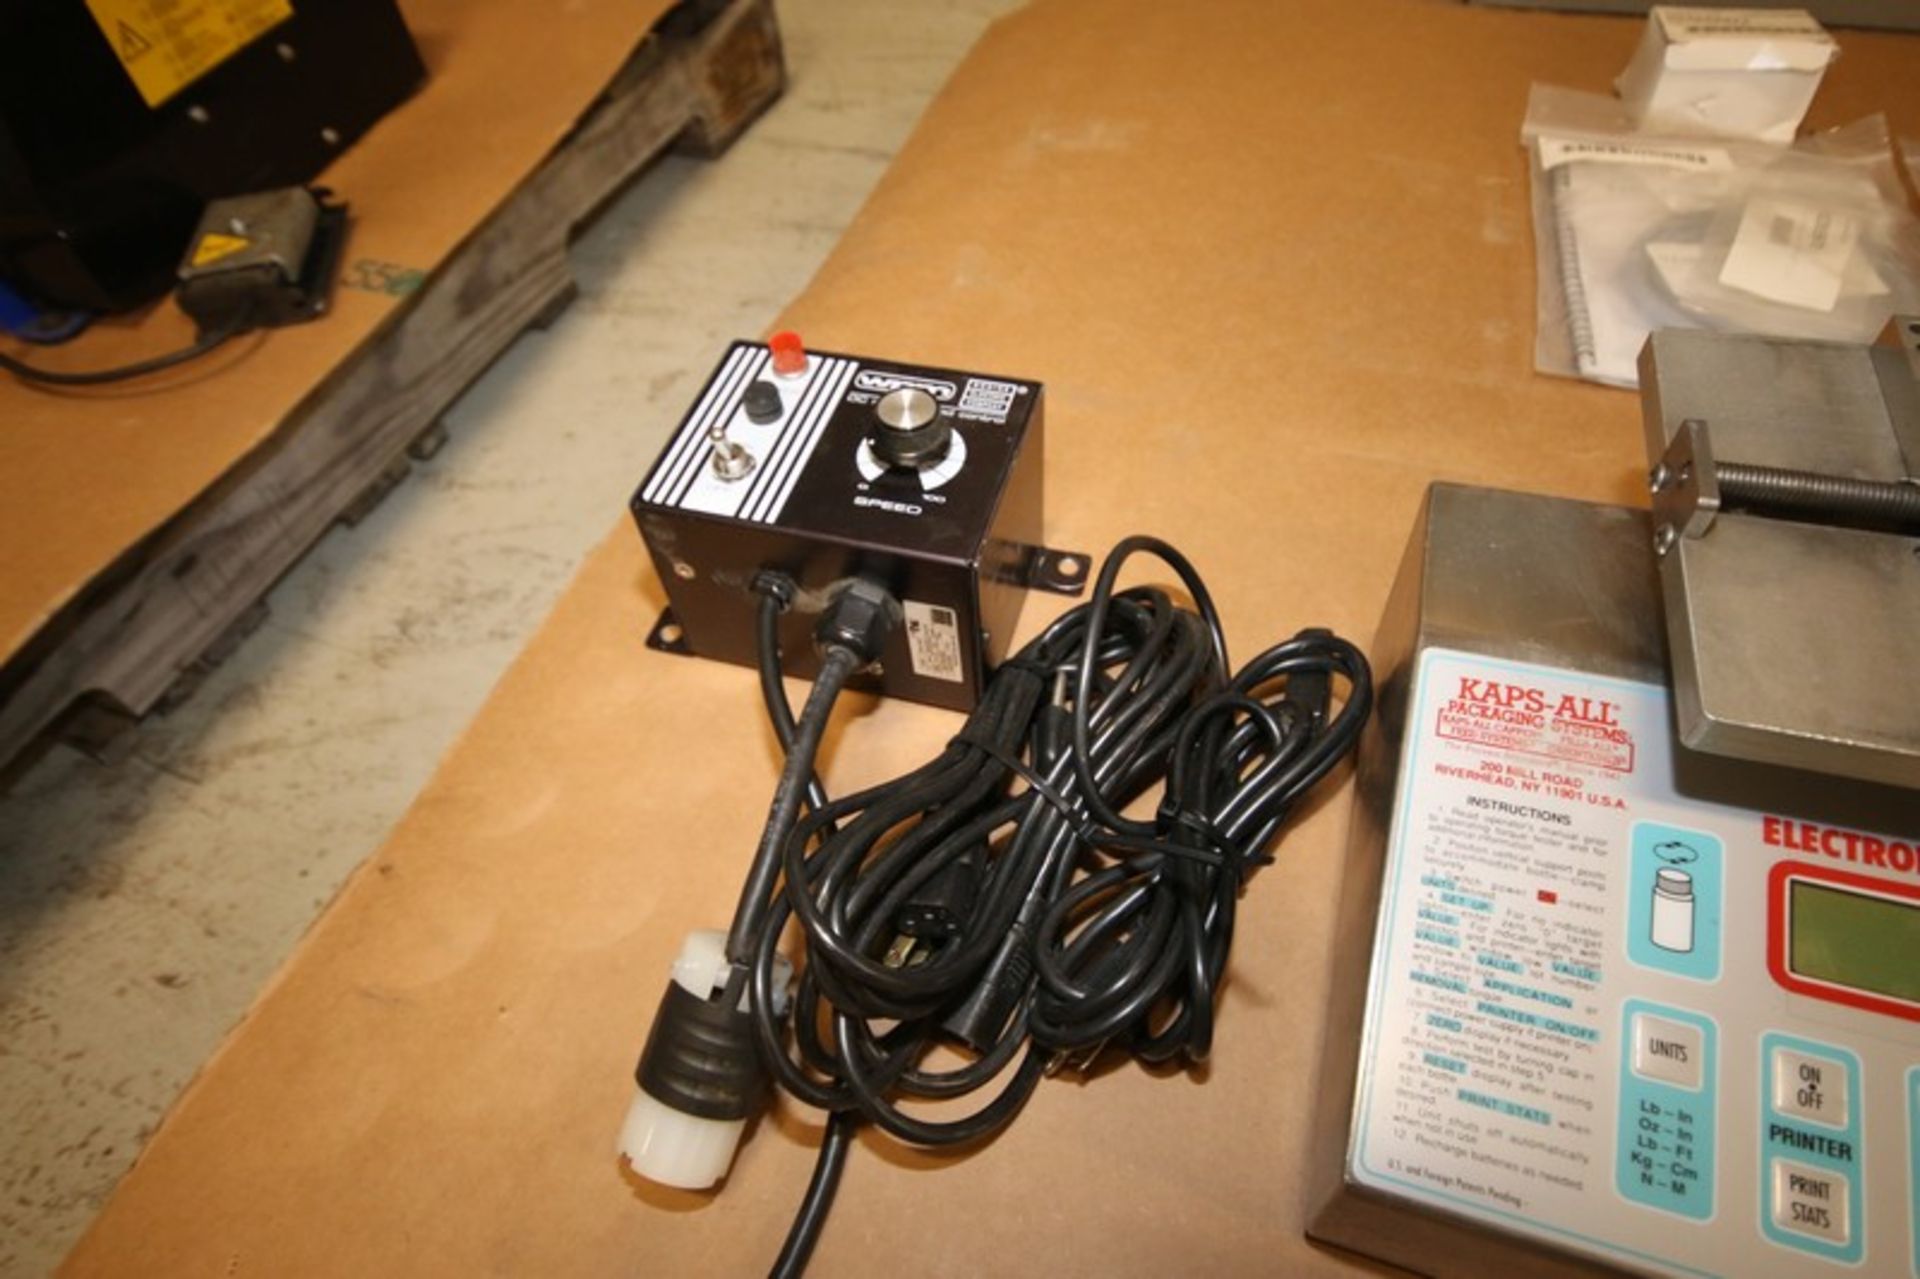 Lot of Assorted Items Including Kaps - All Electronic Torque Tester, WPM Motor Speed Controller & ( - Image 3 of 4